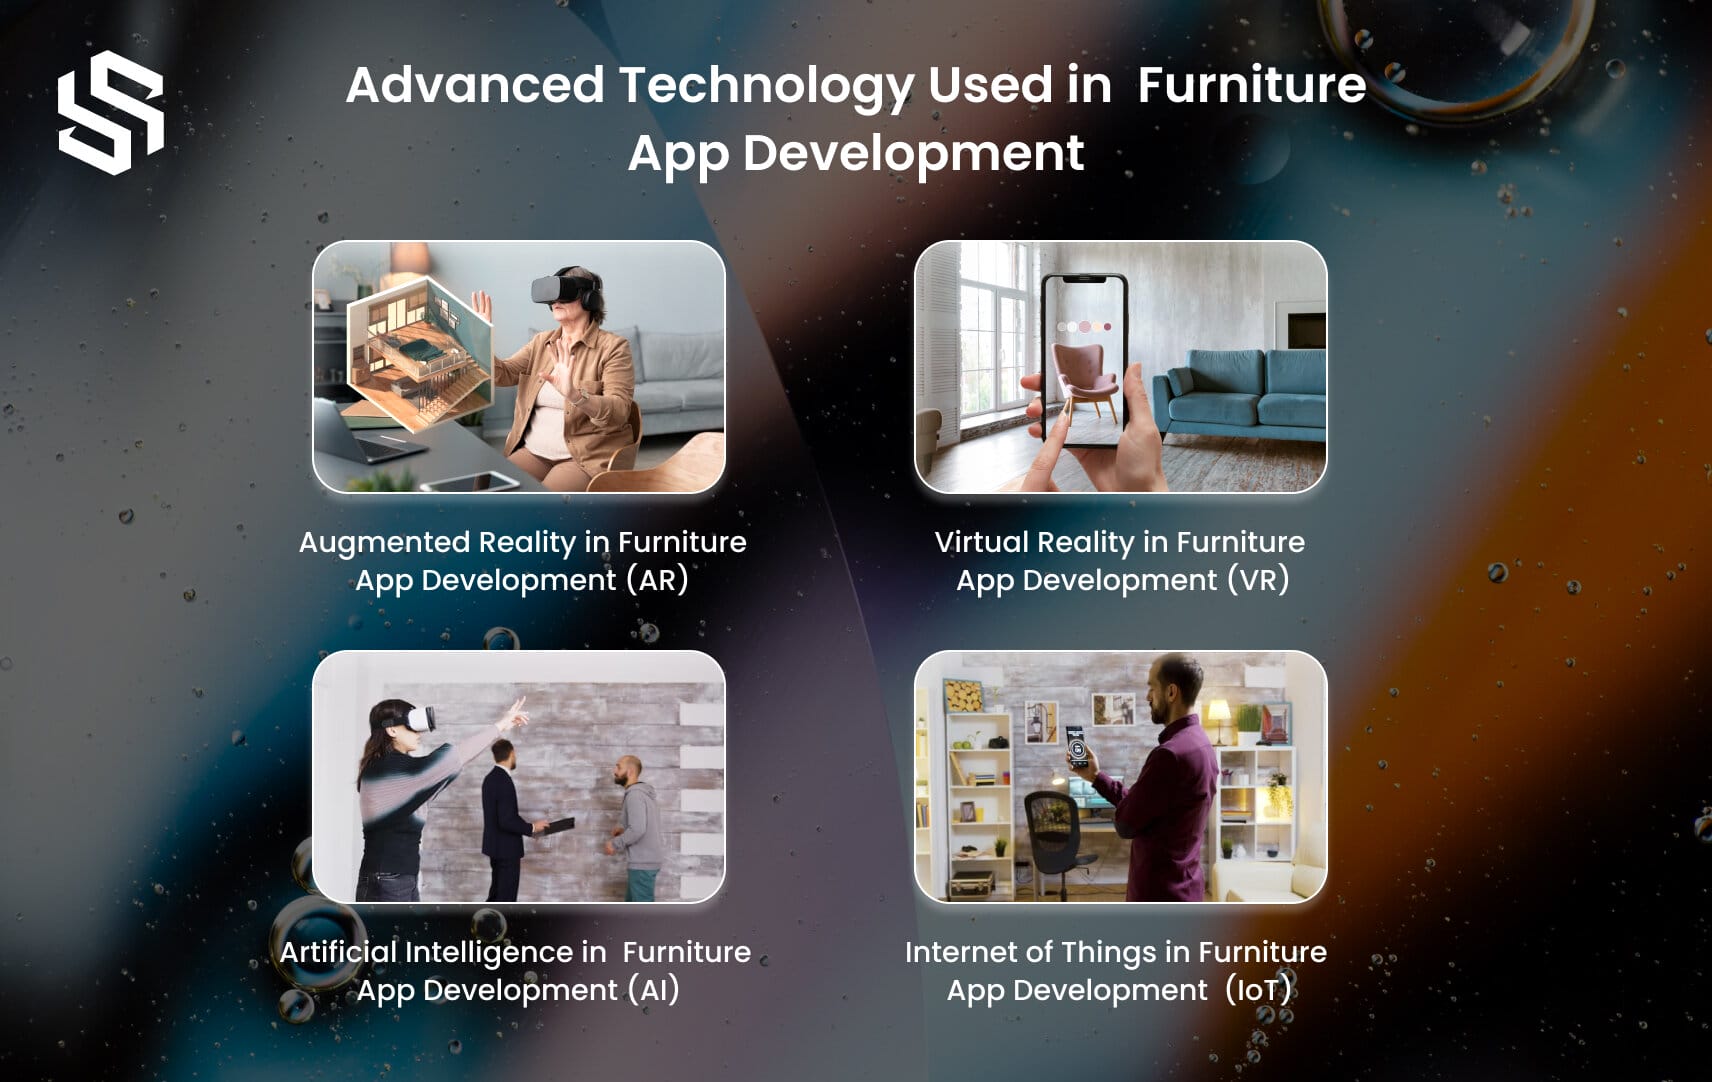 Advanced Technology Used in Furniture App Development